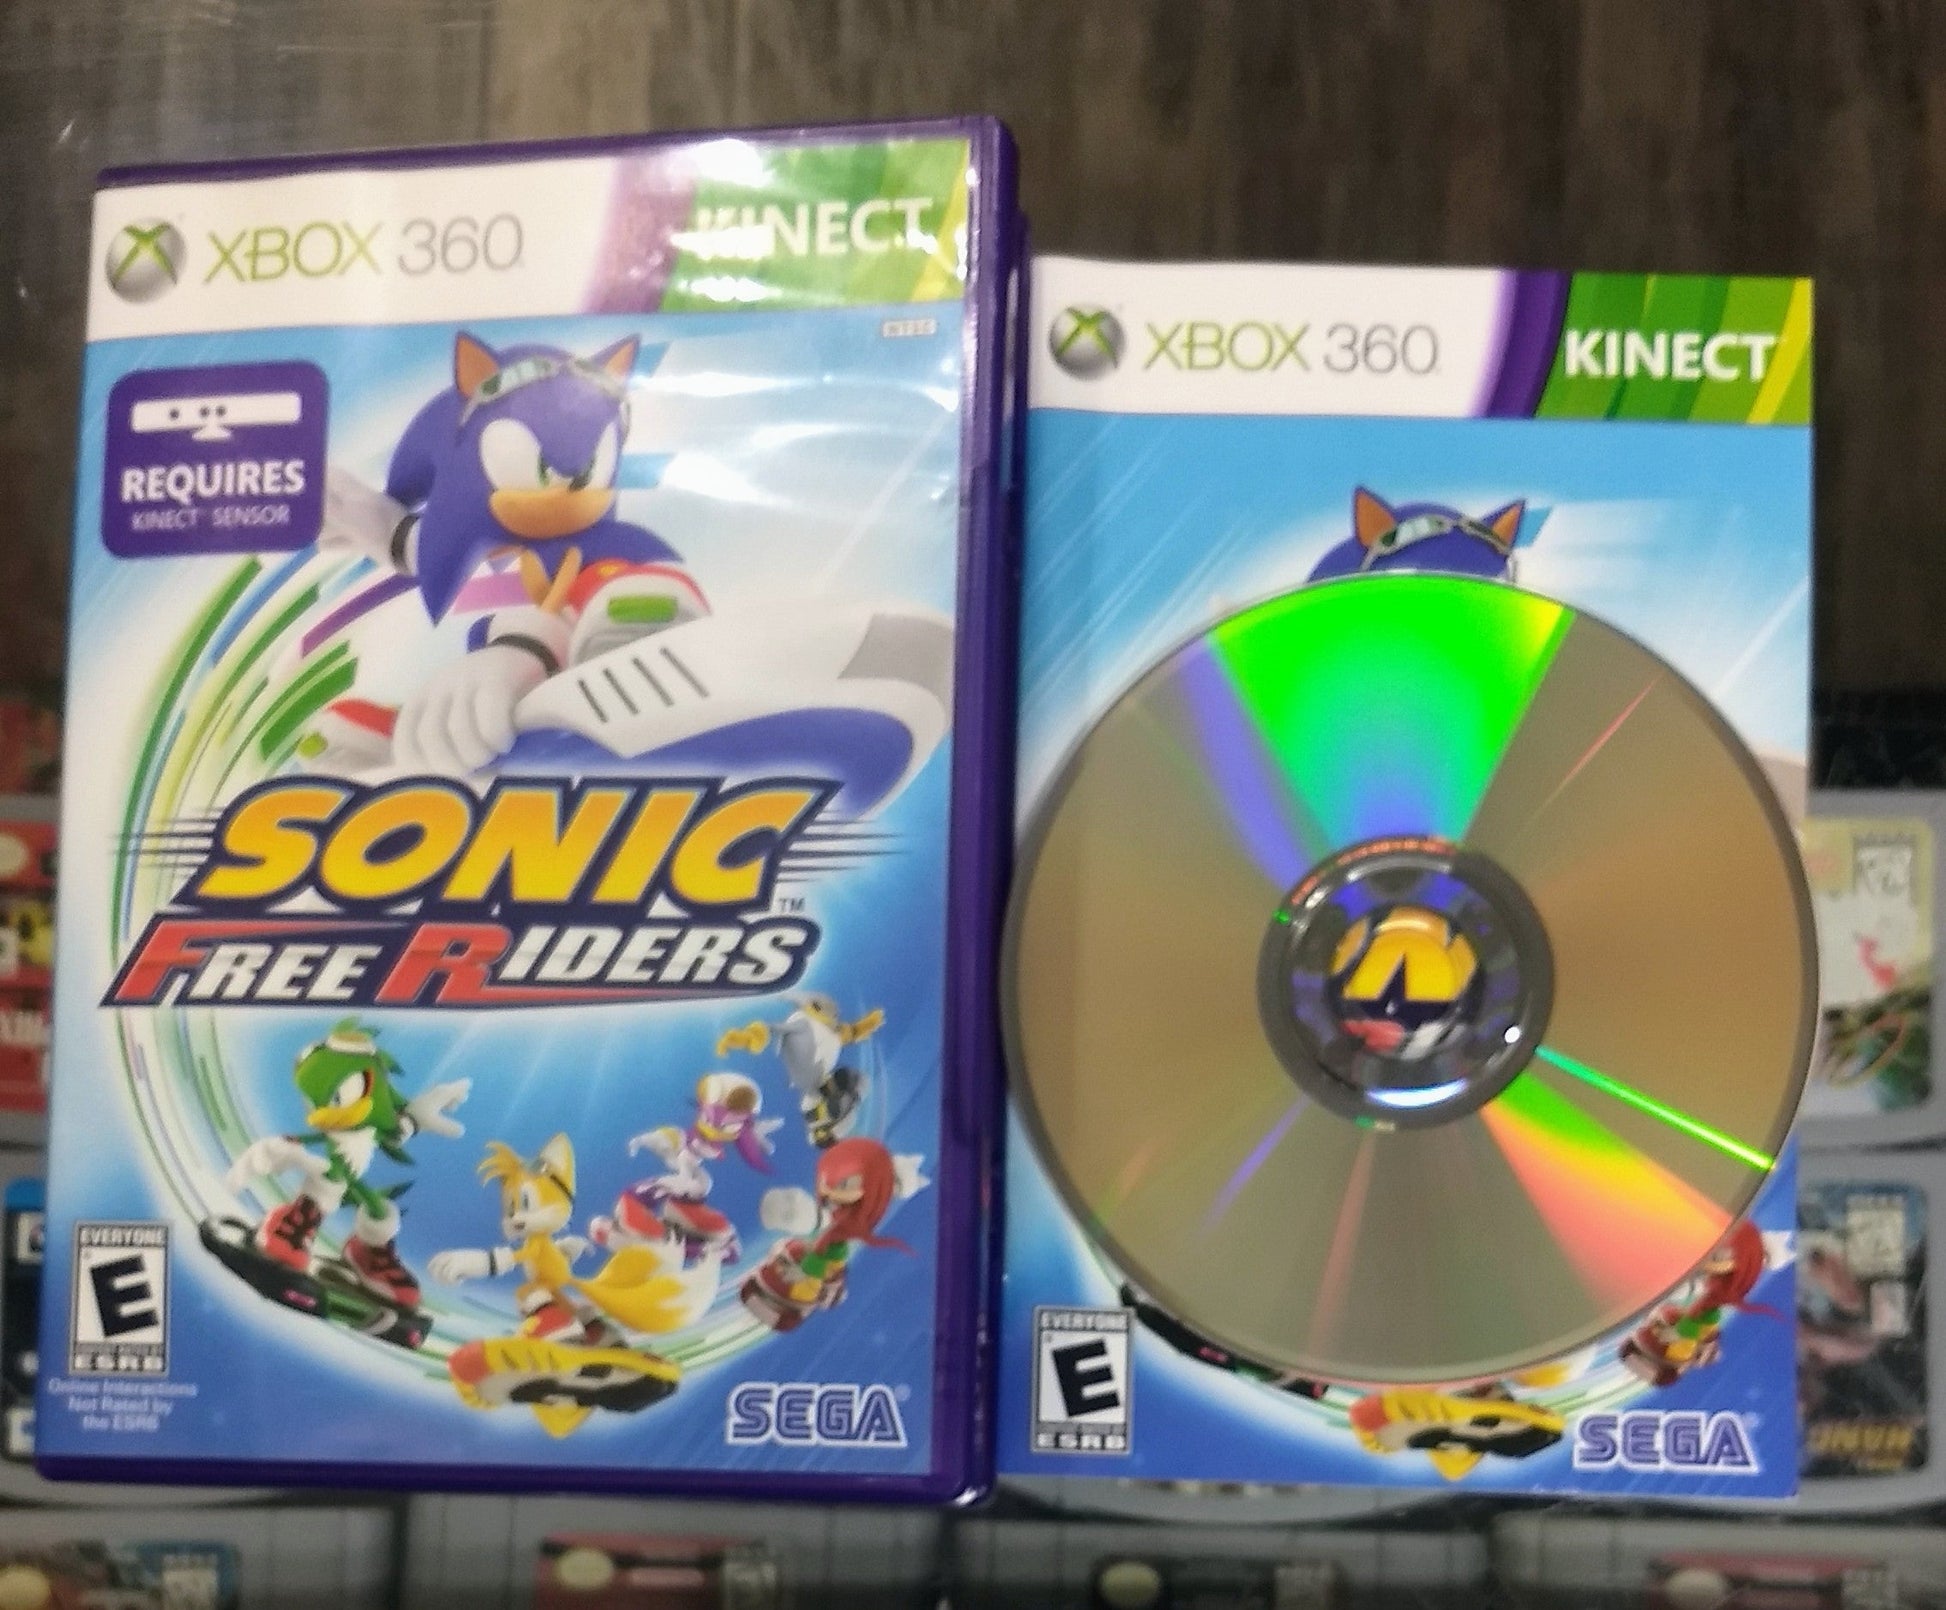 SONIC FREE RIDERS (XBOX 360 X360) - jeux video game-x